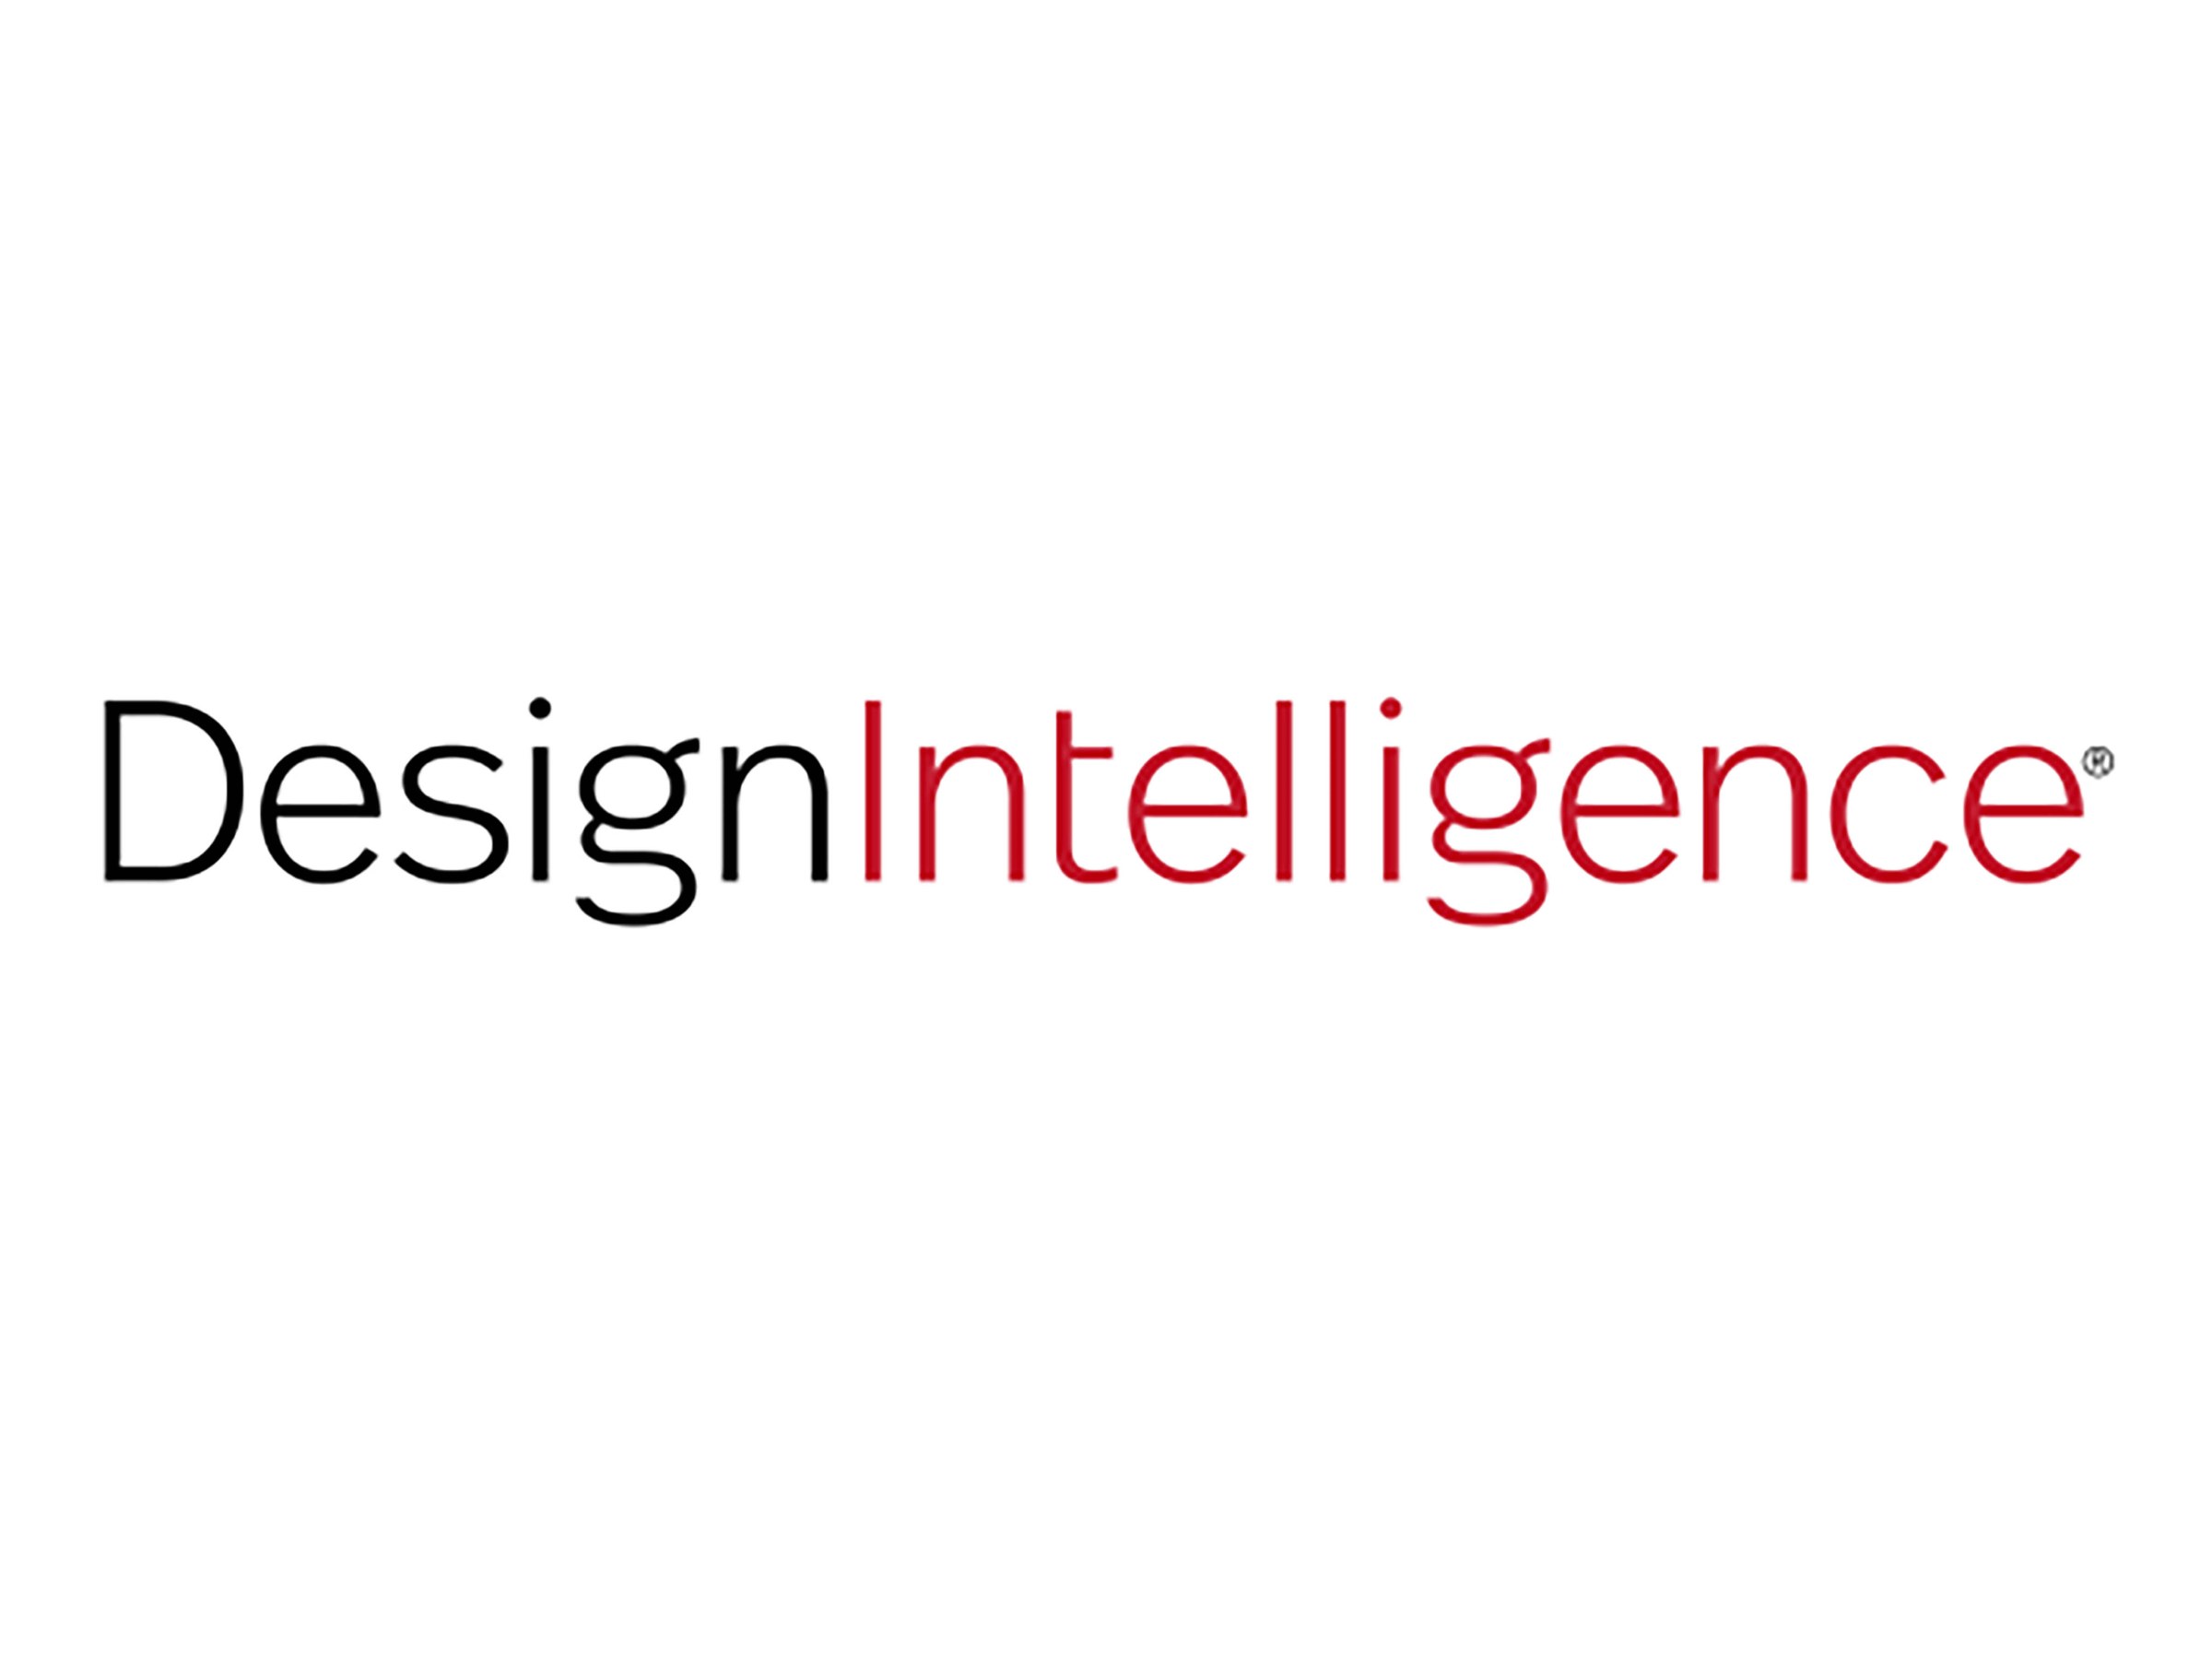 Design Intelligence logo in black and red text on white background